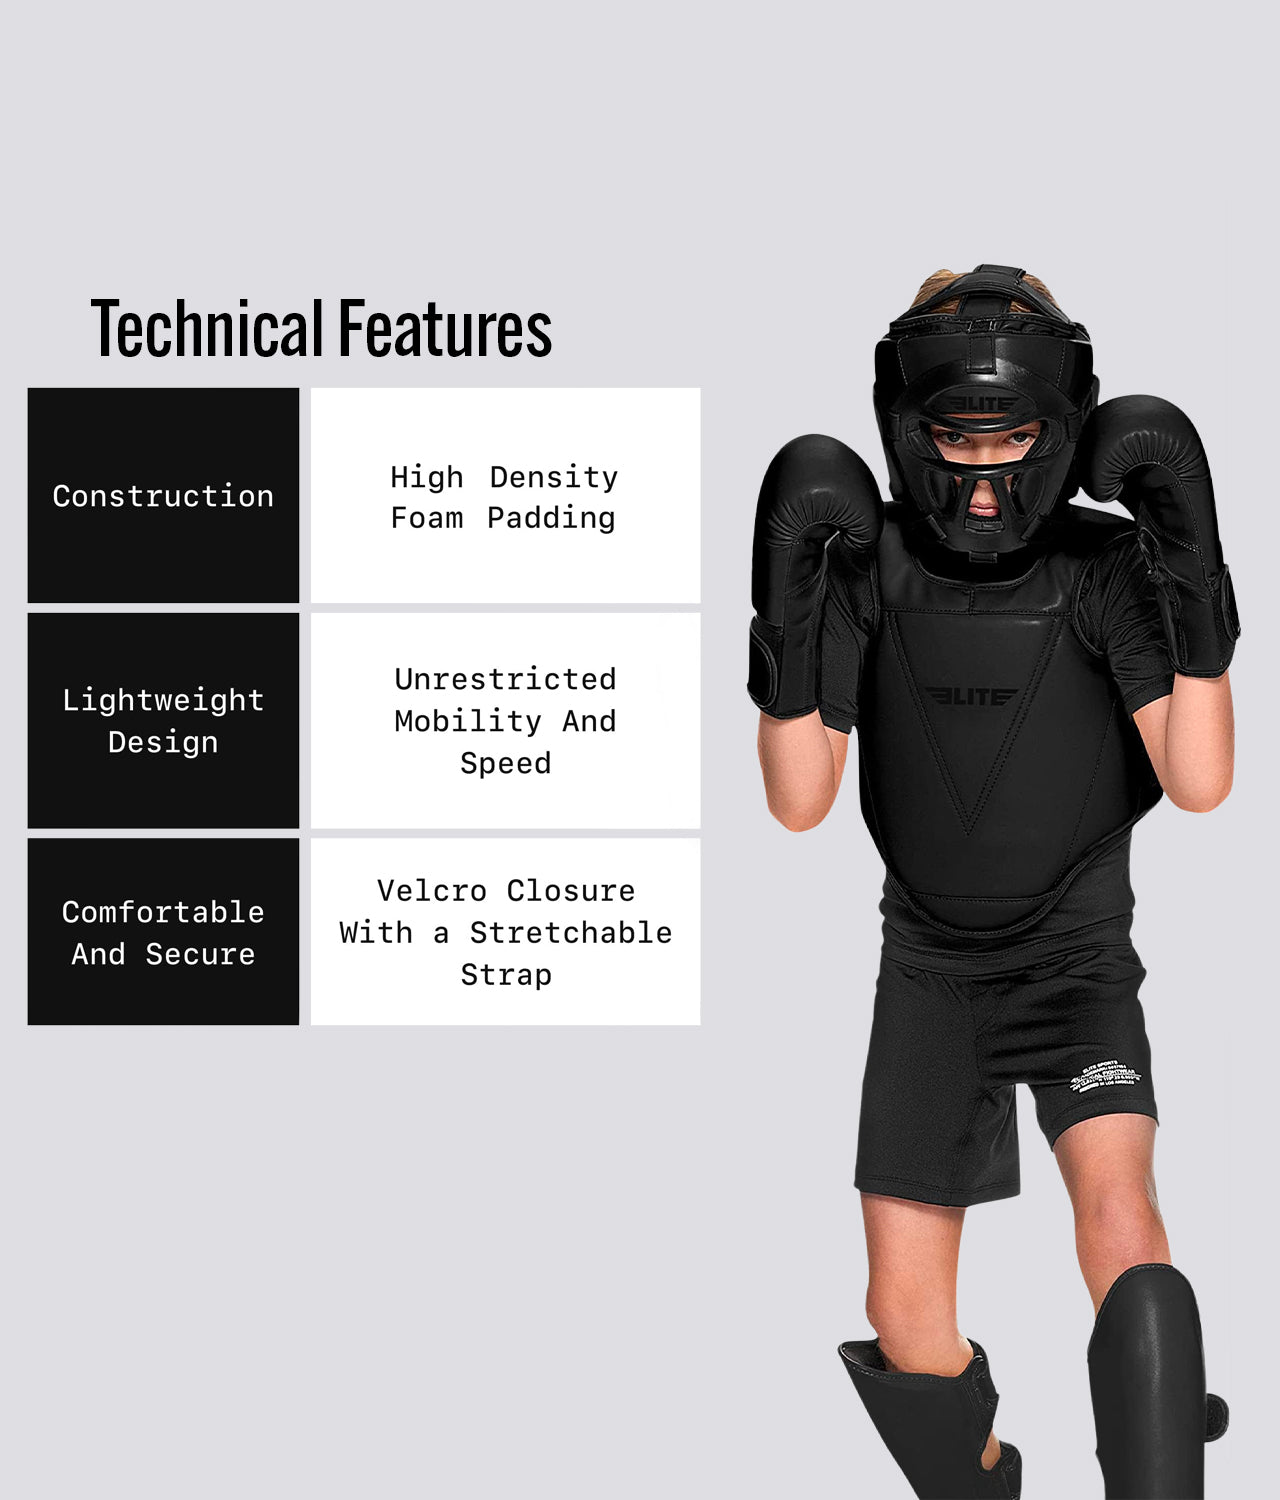 Elite Sports Kids' Black Boxing Safety Headgear Technical Features